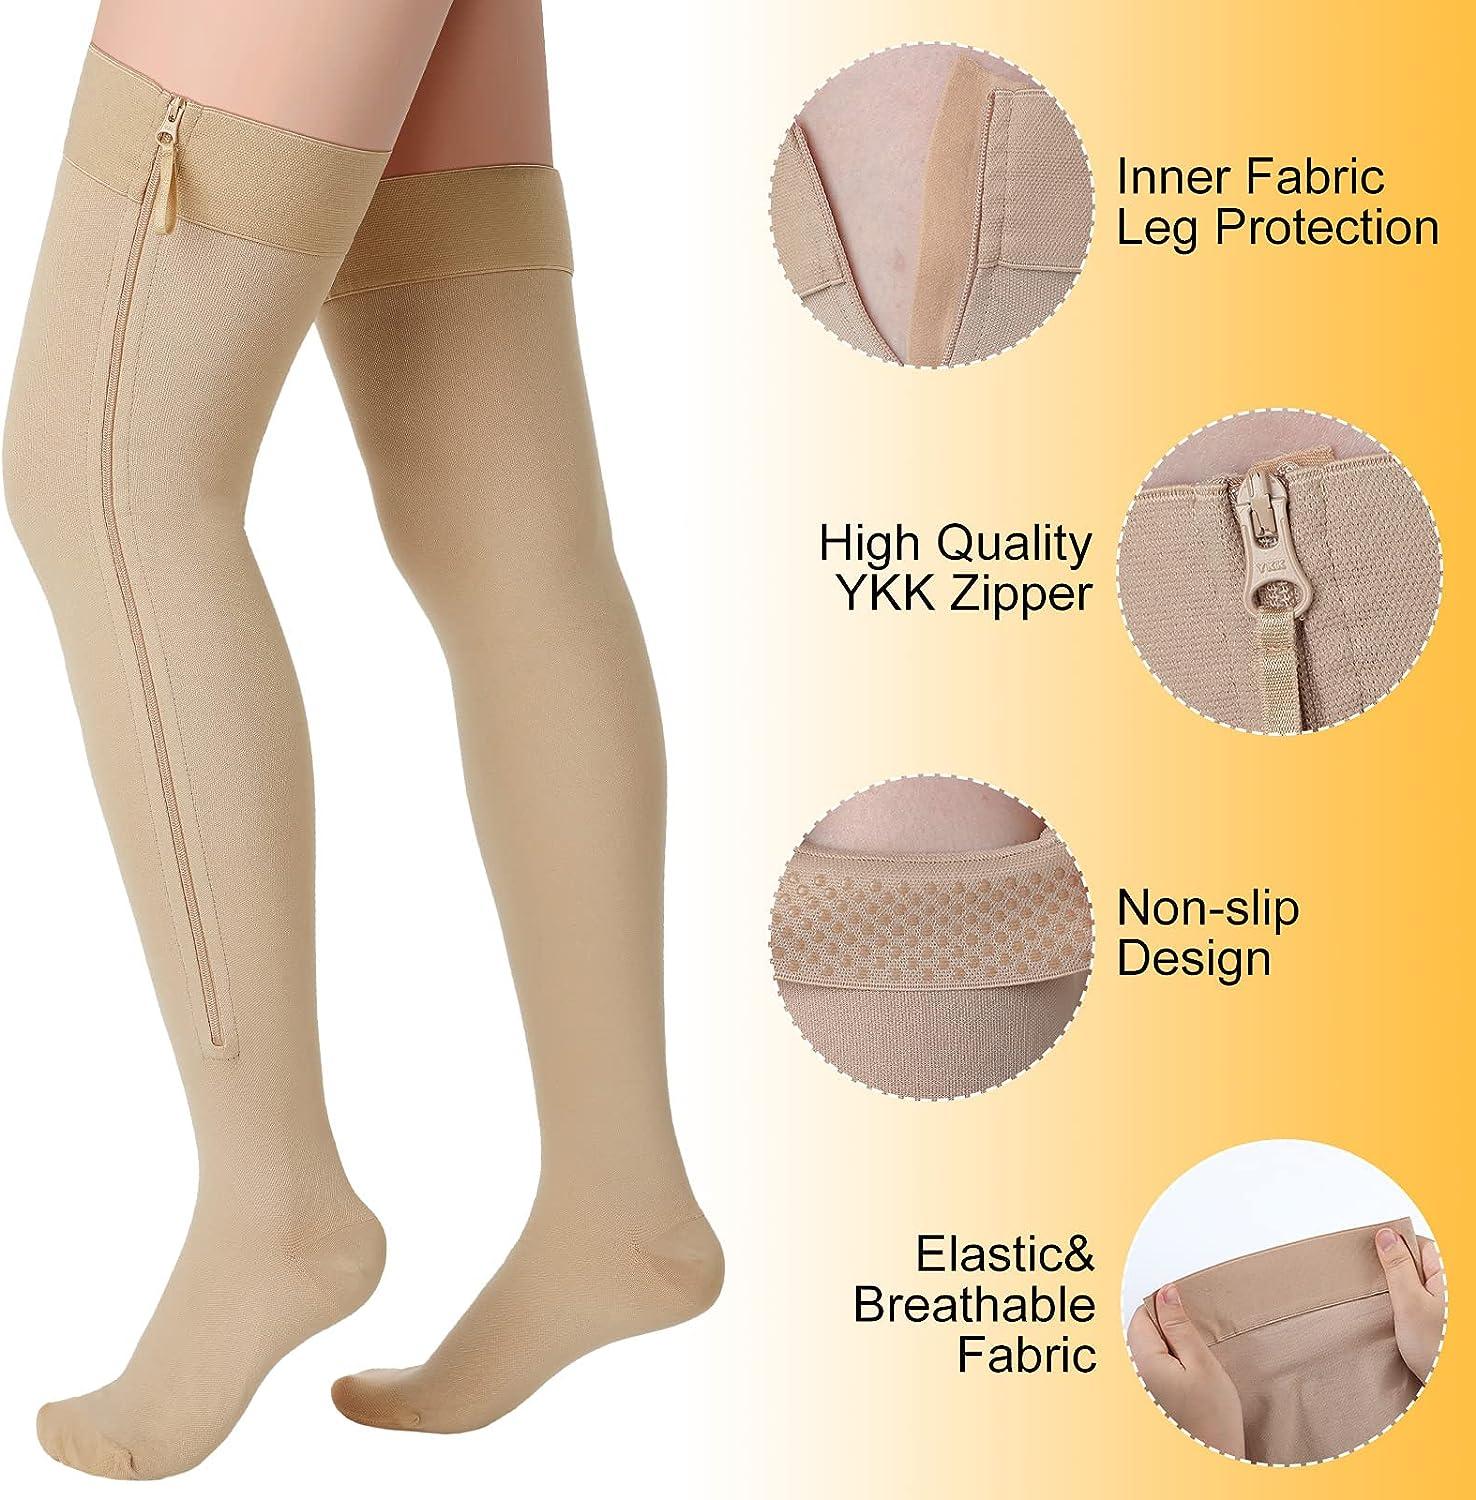 The Zippered Compression Socks